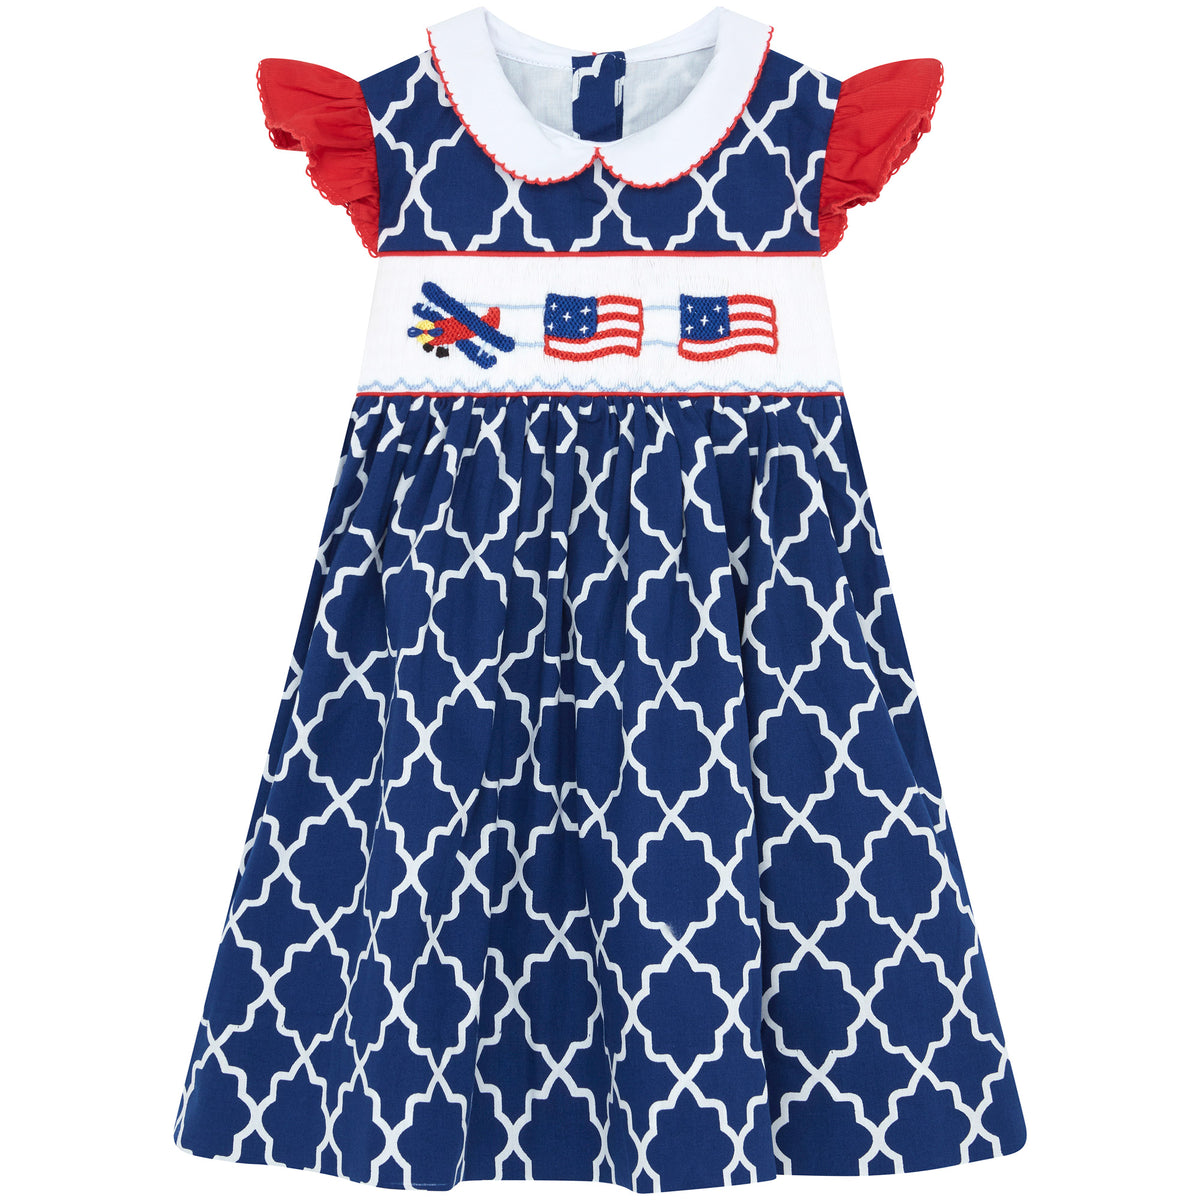 Little Princess Aurora Hand Smocked Embroidered Flags Cotton Girls Dress Navy Red White | Holly Hastie London